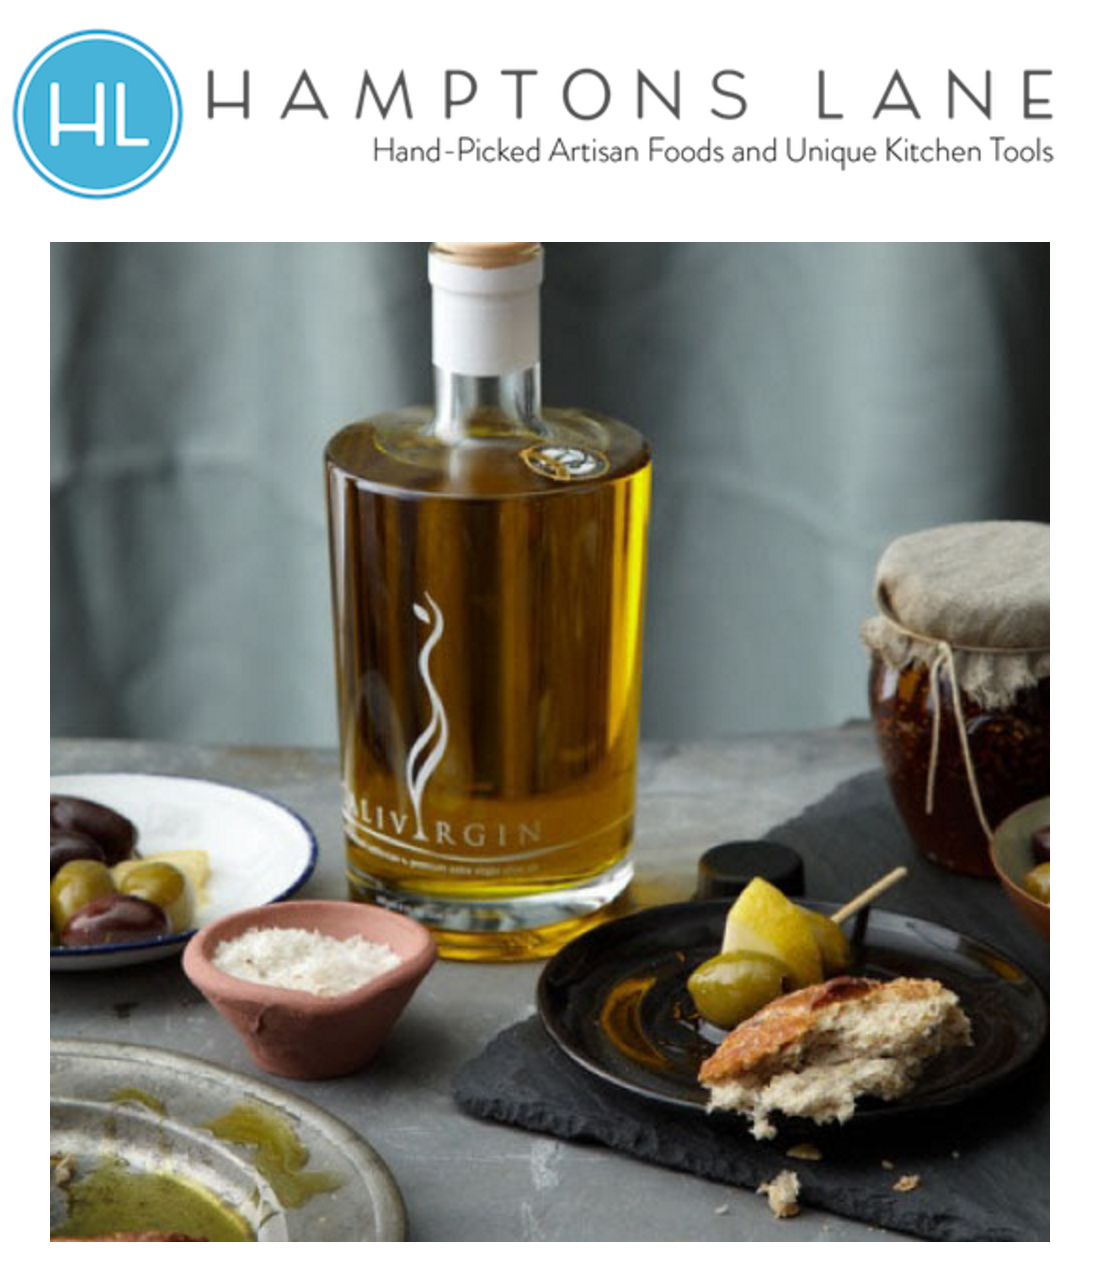 Free Olive Oil ($28 Value) with Hamptons Lane Subscription!